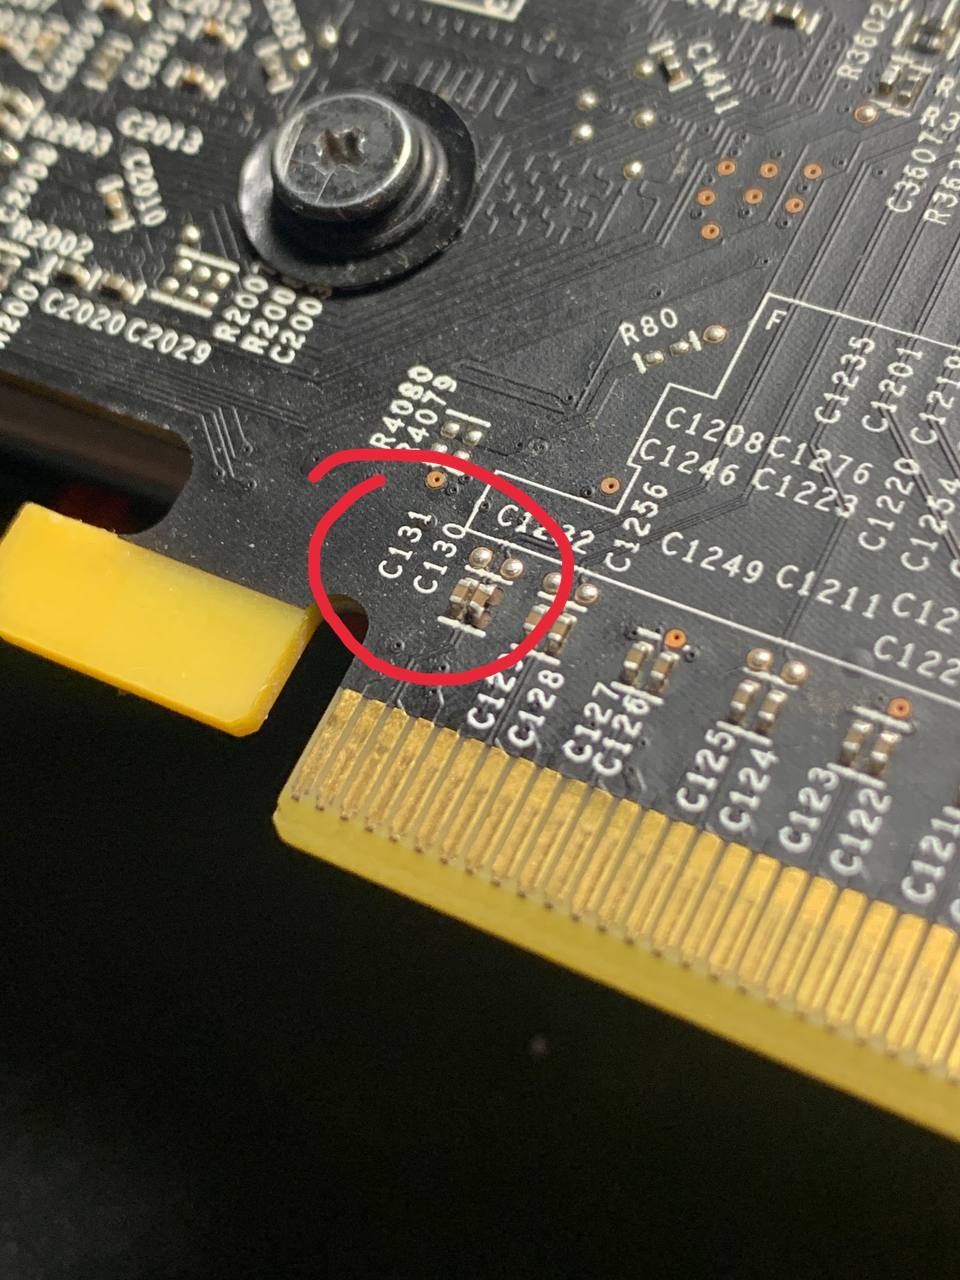 Help with video card r7 370, chipped smd capacitor on psi - My, Repair of equipment, SMD Capacitors, Video card